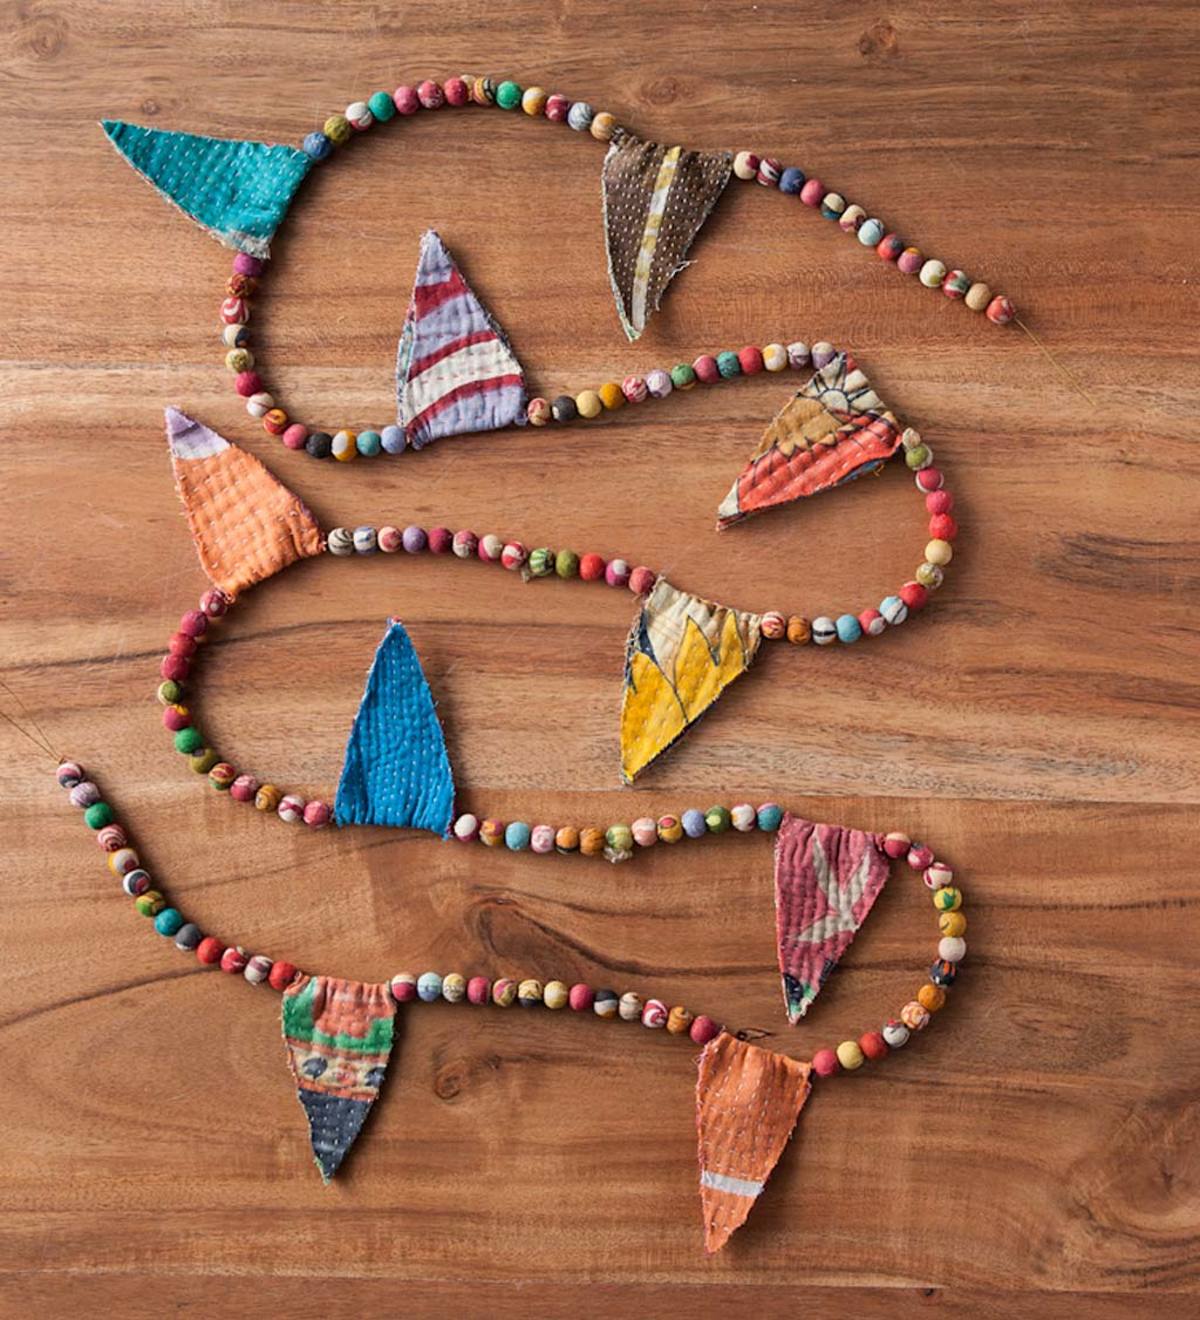 Small Round Sari Bead Garland with Flags - 72"L